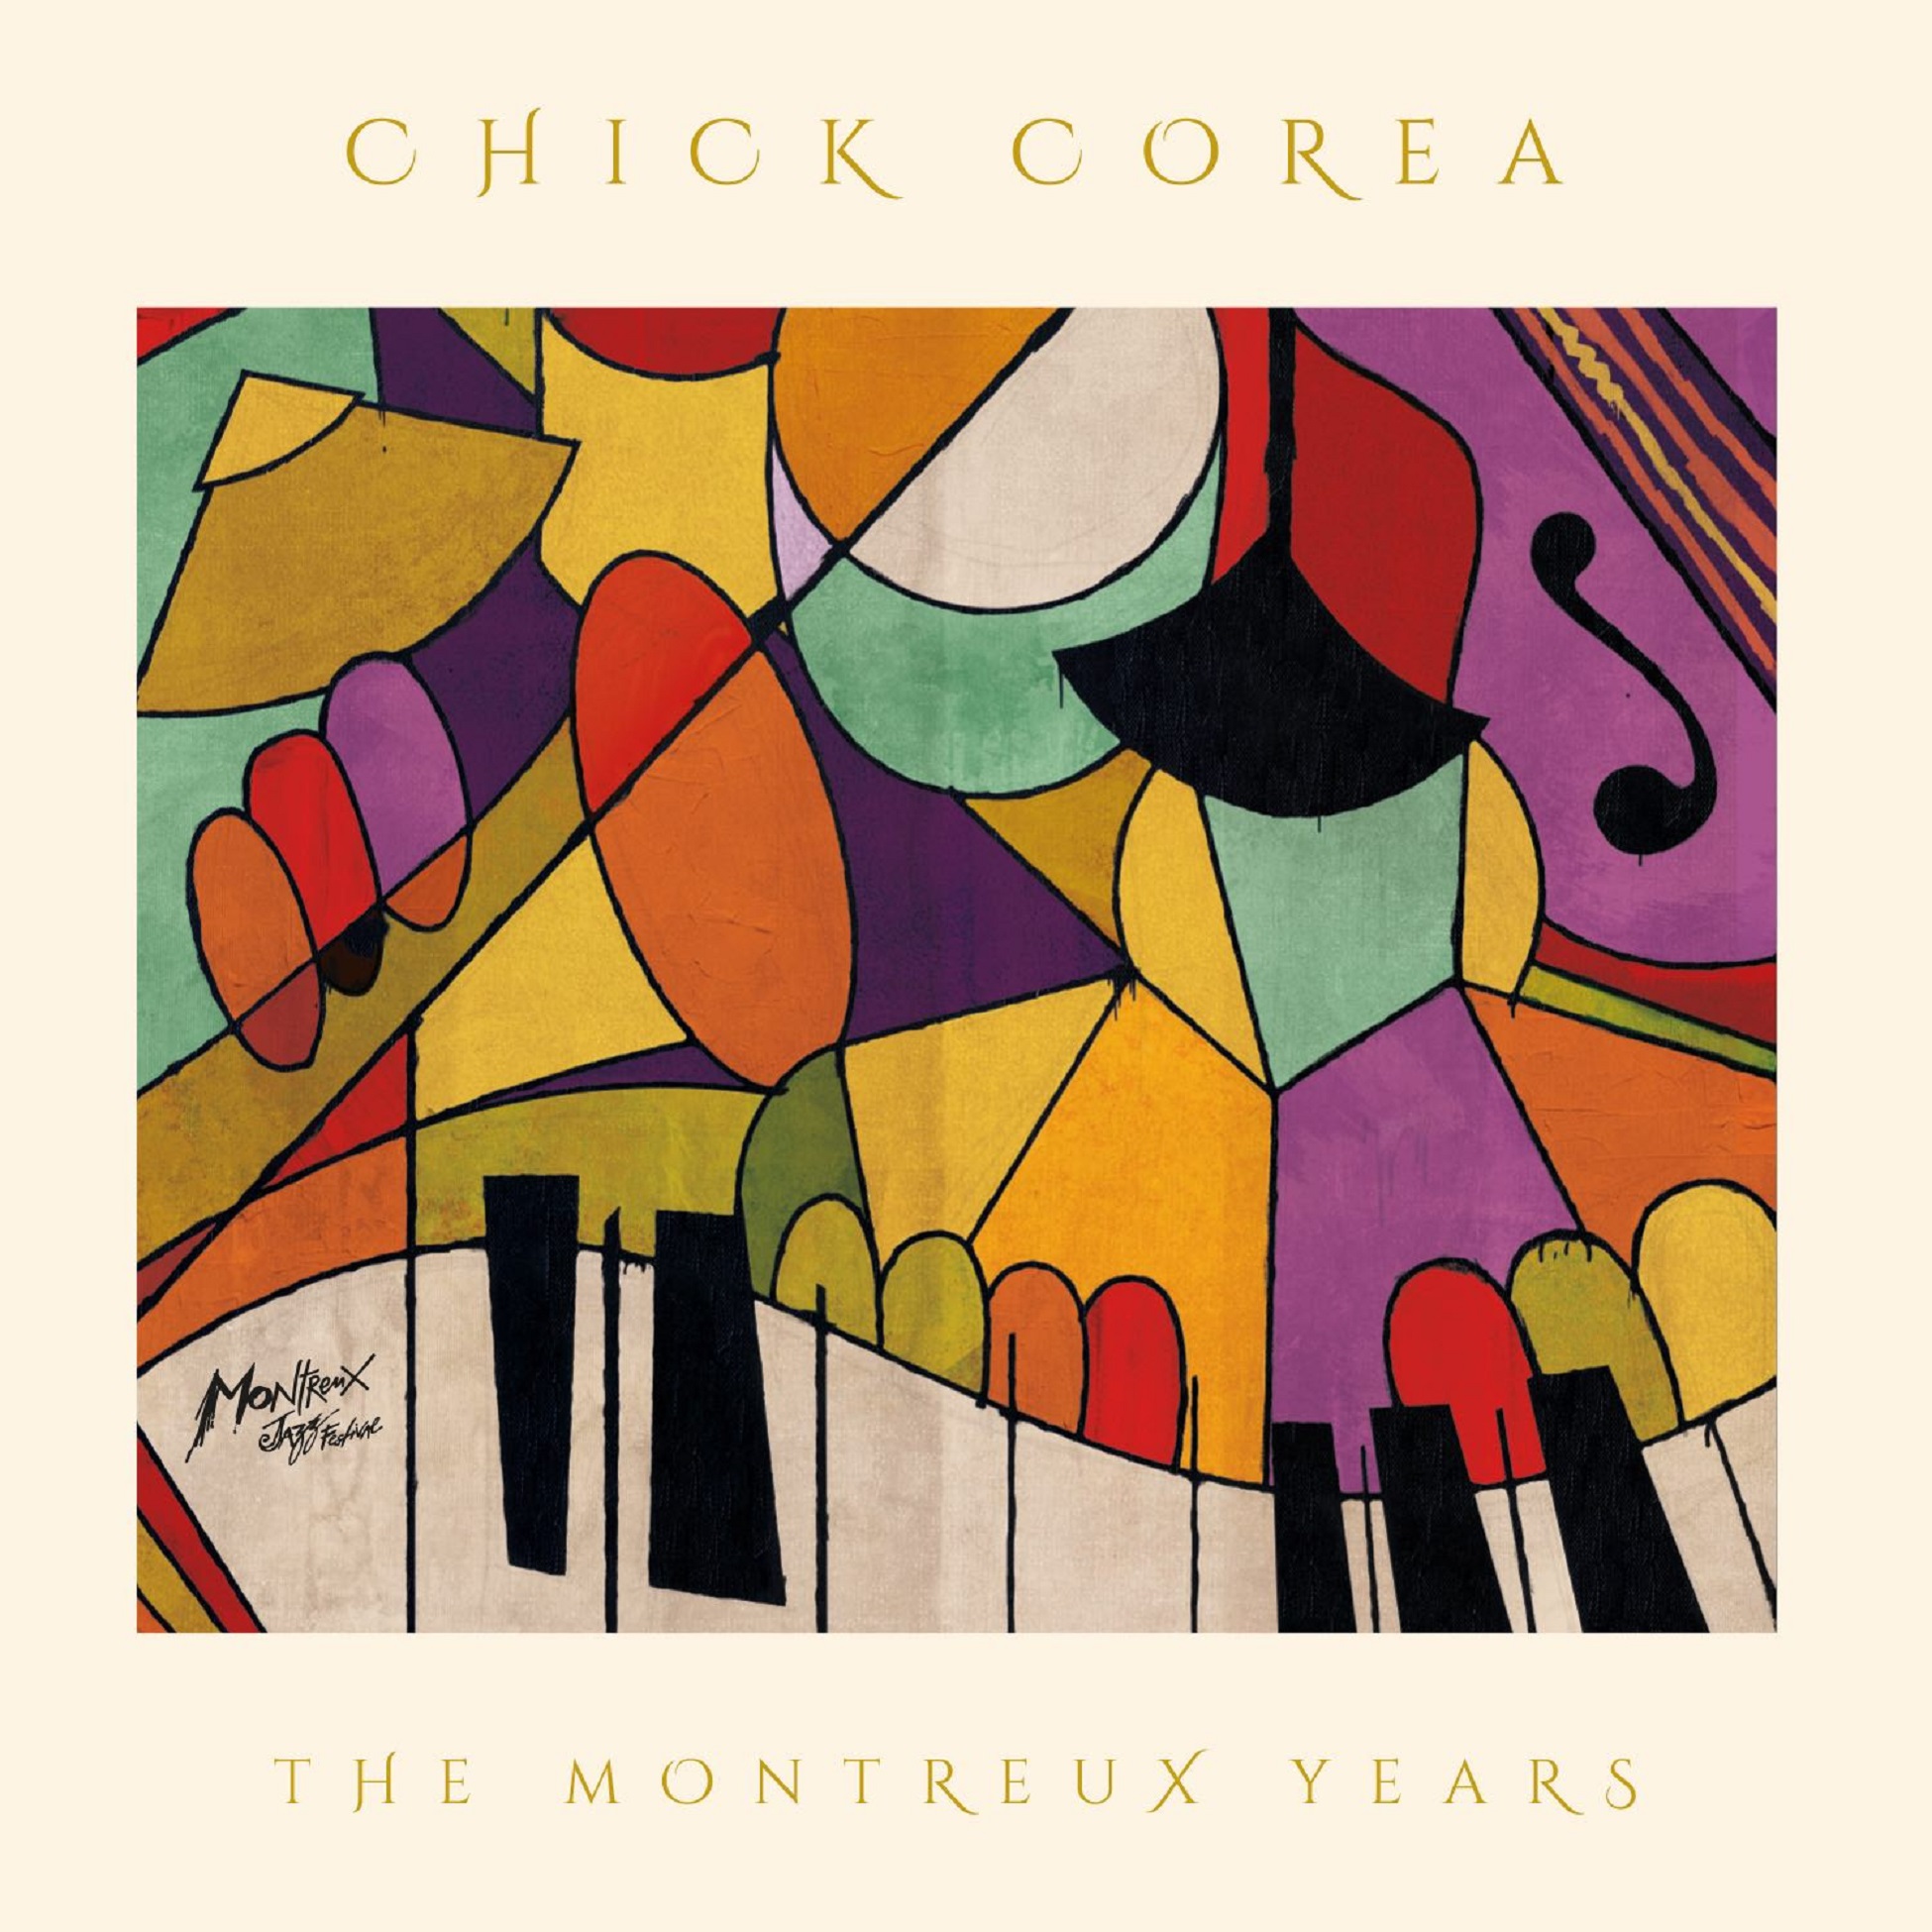 CHICK COREA: THE MONTREUX YEARS ~ NEW Music Video For “America (Continents Pt. 4)” Out Now